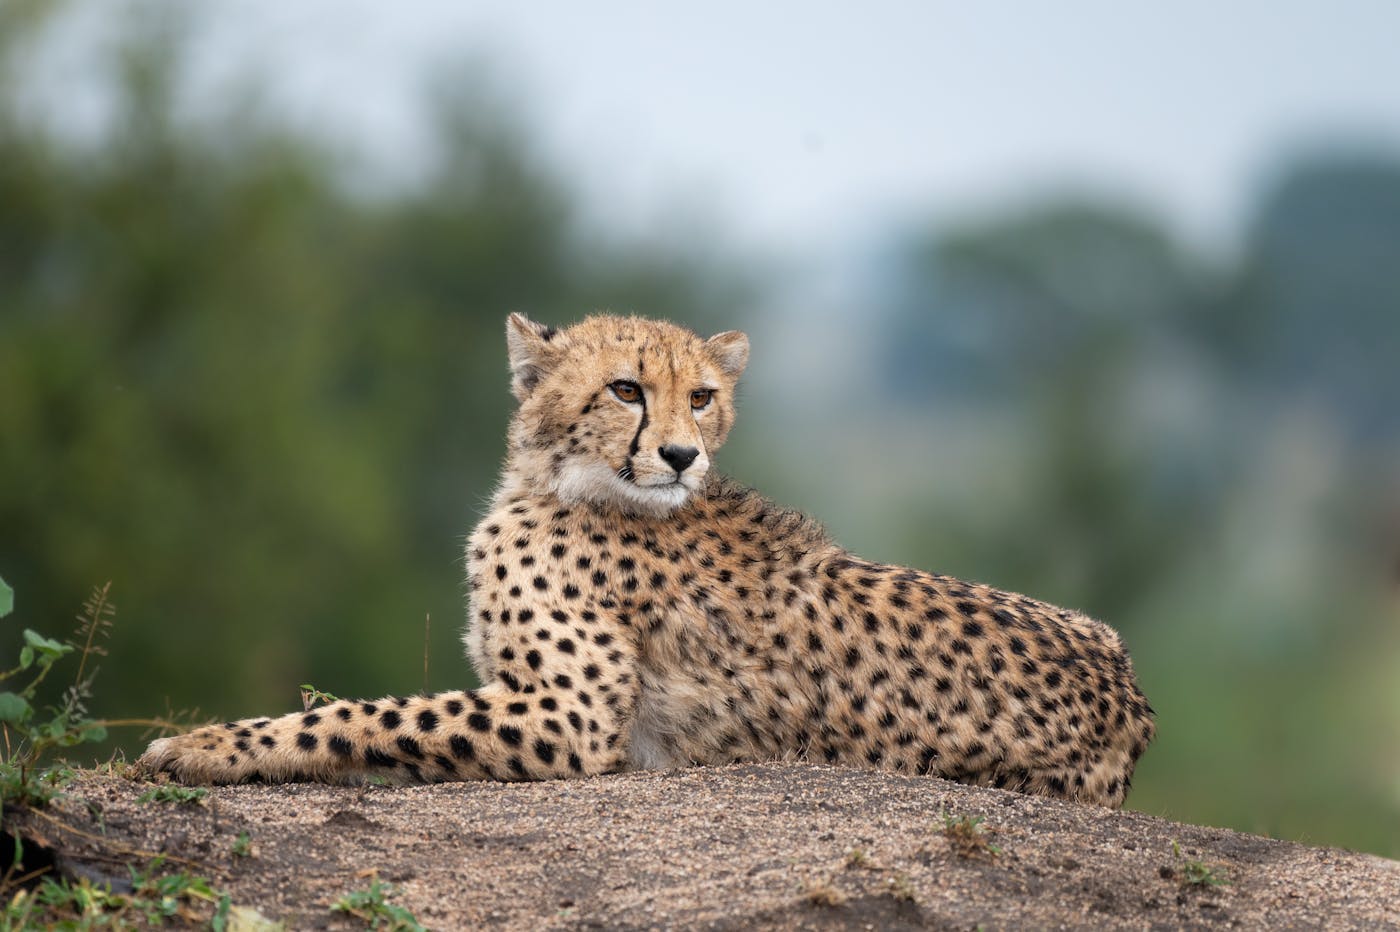 Preserving Cheetahs By Elevating Pastoral Women’s Livelihoods in Somaliland